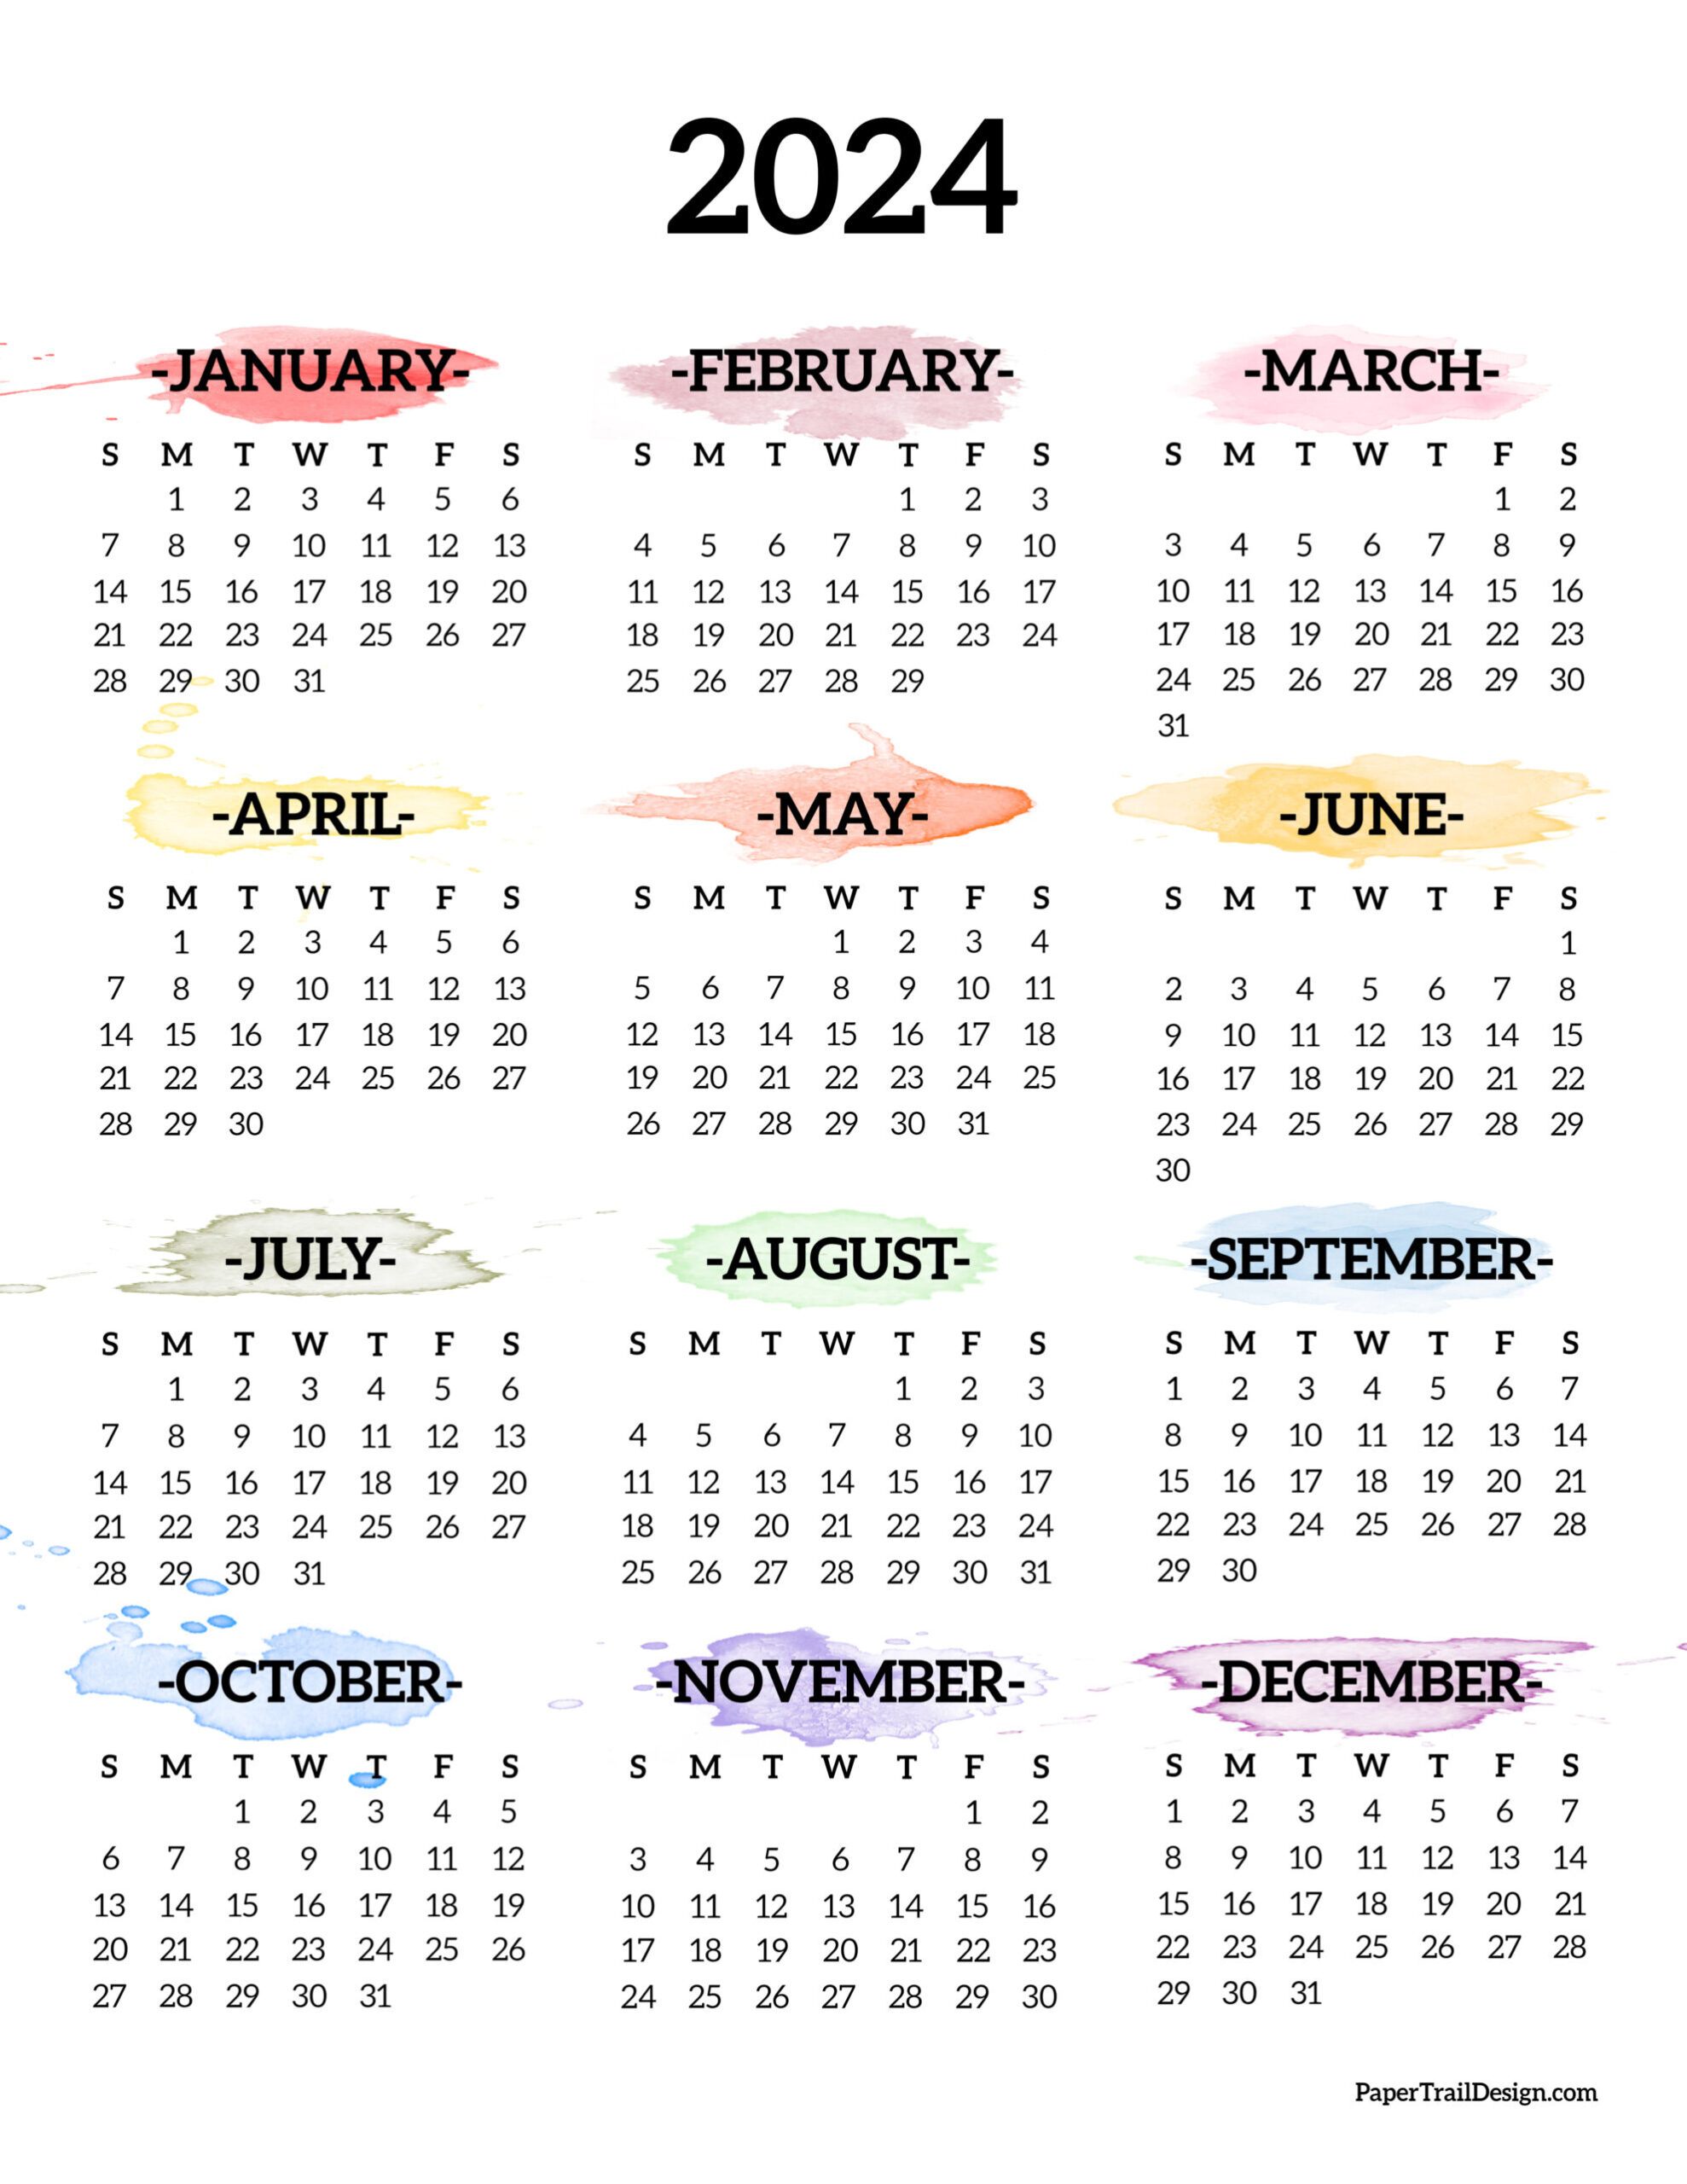 Calendar 2024 Printable One Page - Paper Trail Design | 2024 Calendar Printable Free Pdf One Page